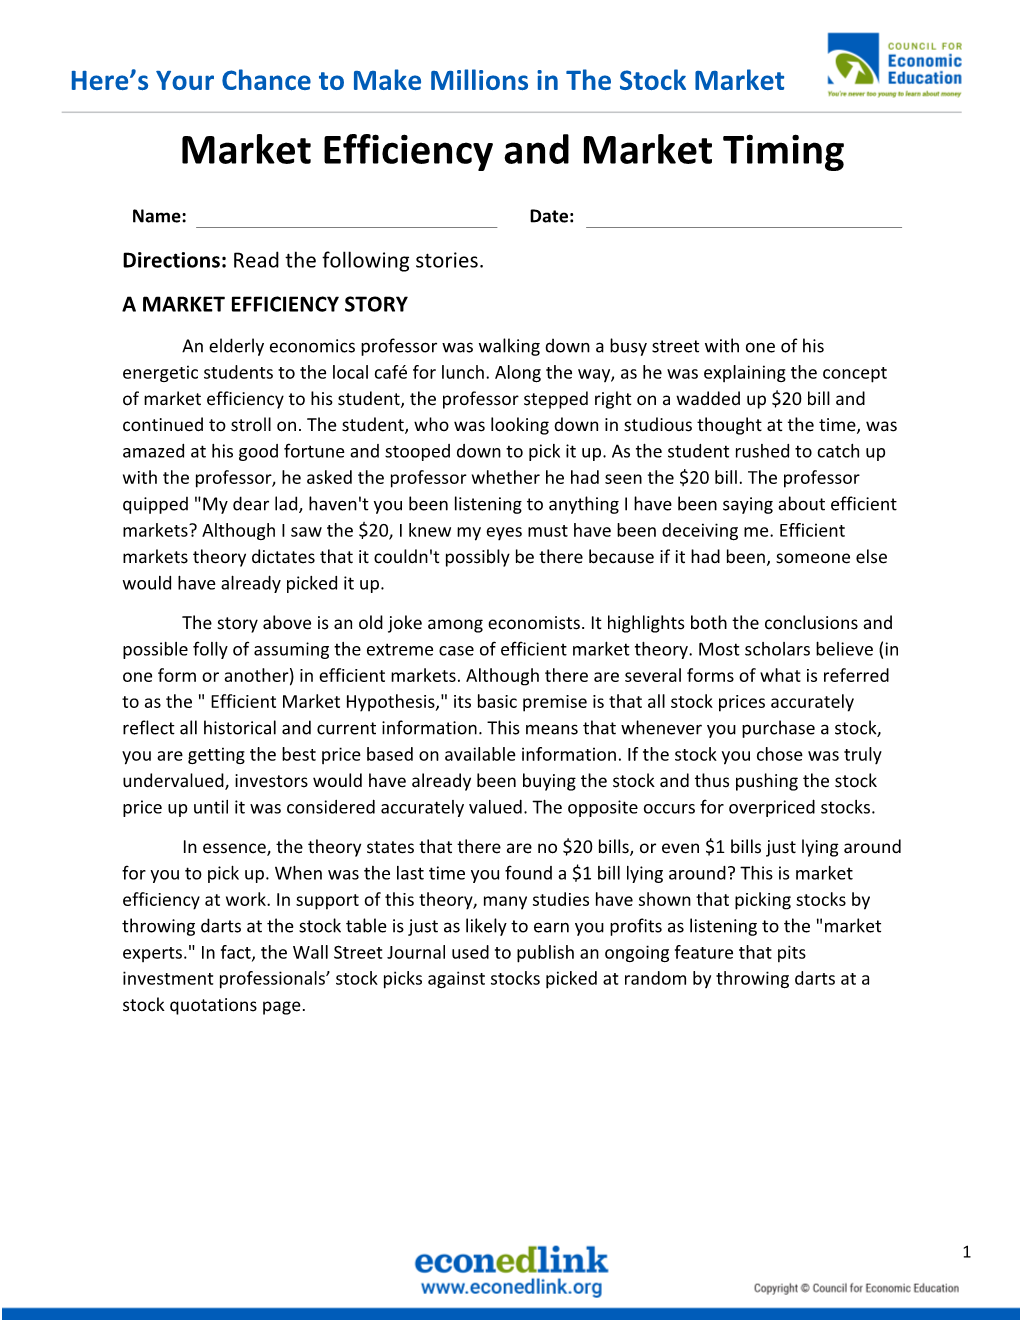 Market Efficiency and Market Timing